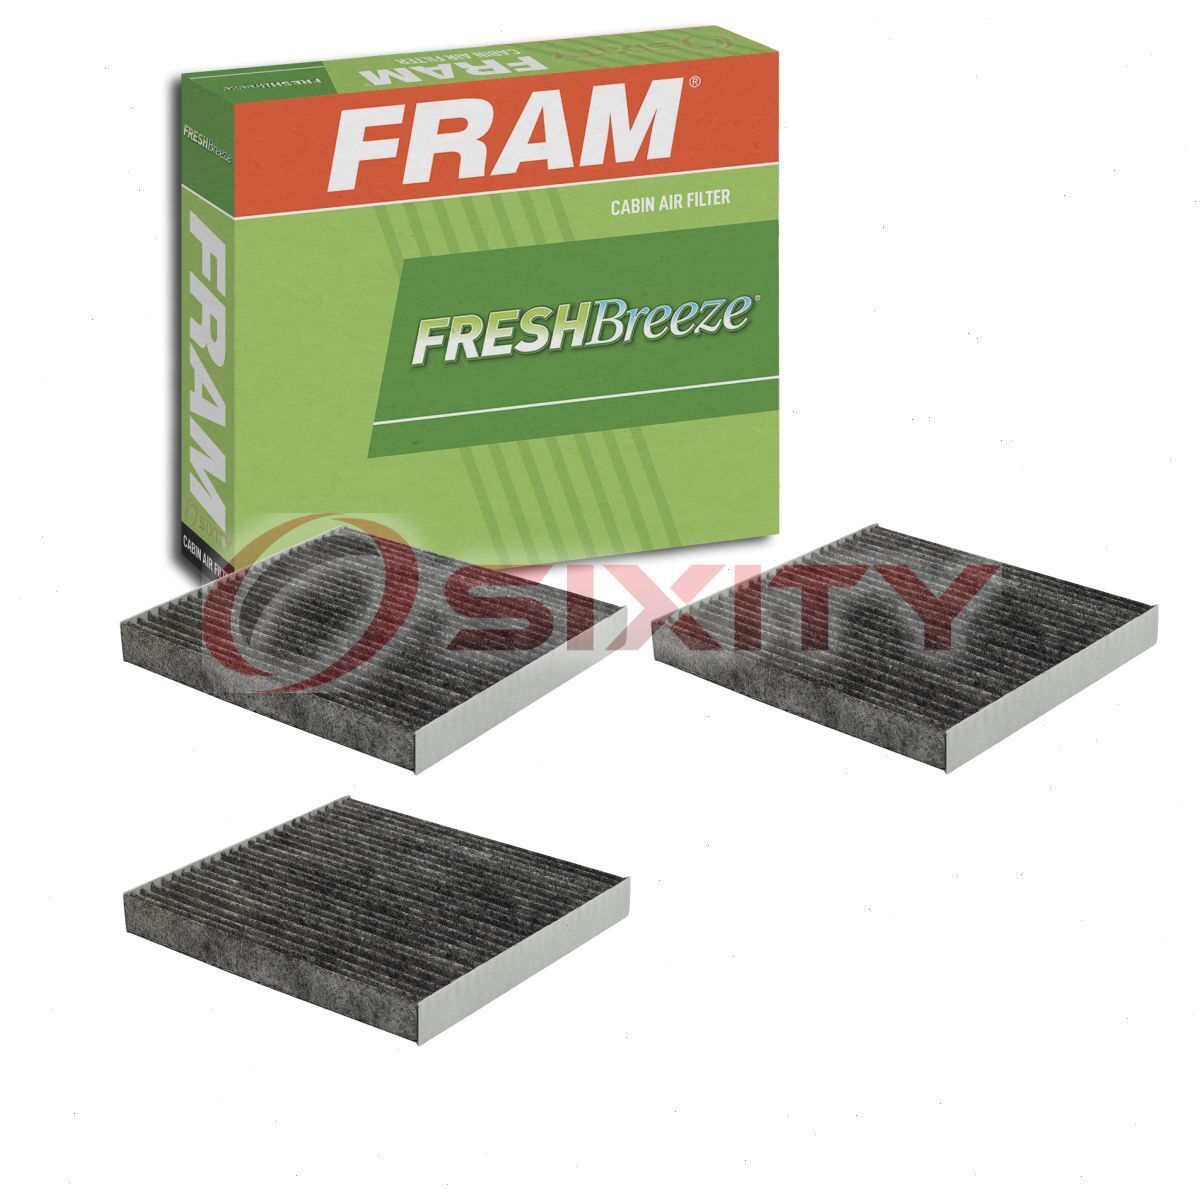 3 pc FRAM Fresh Breeze CF11671 Cabin Air Filters for WP842 RA-85 PO-5692 ty